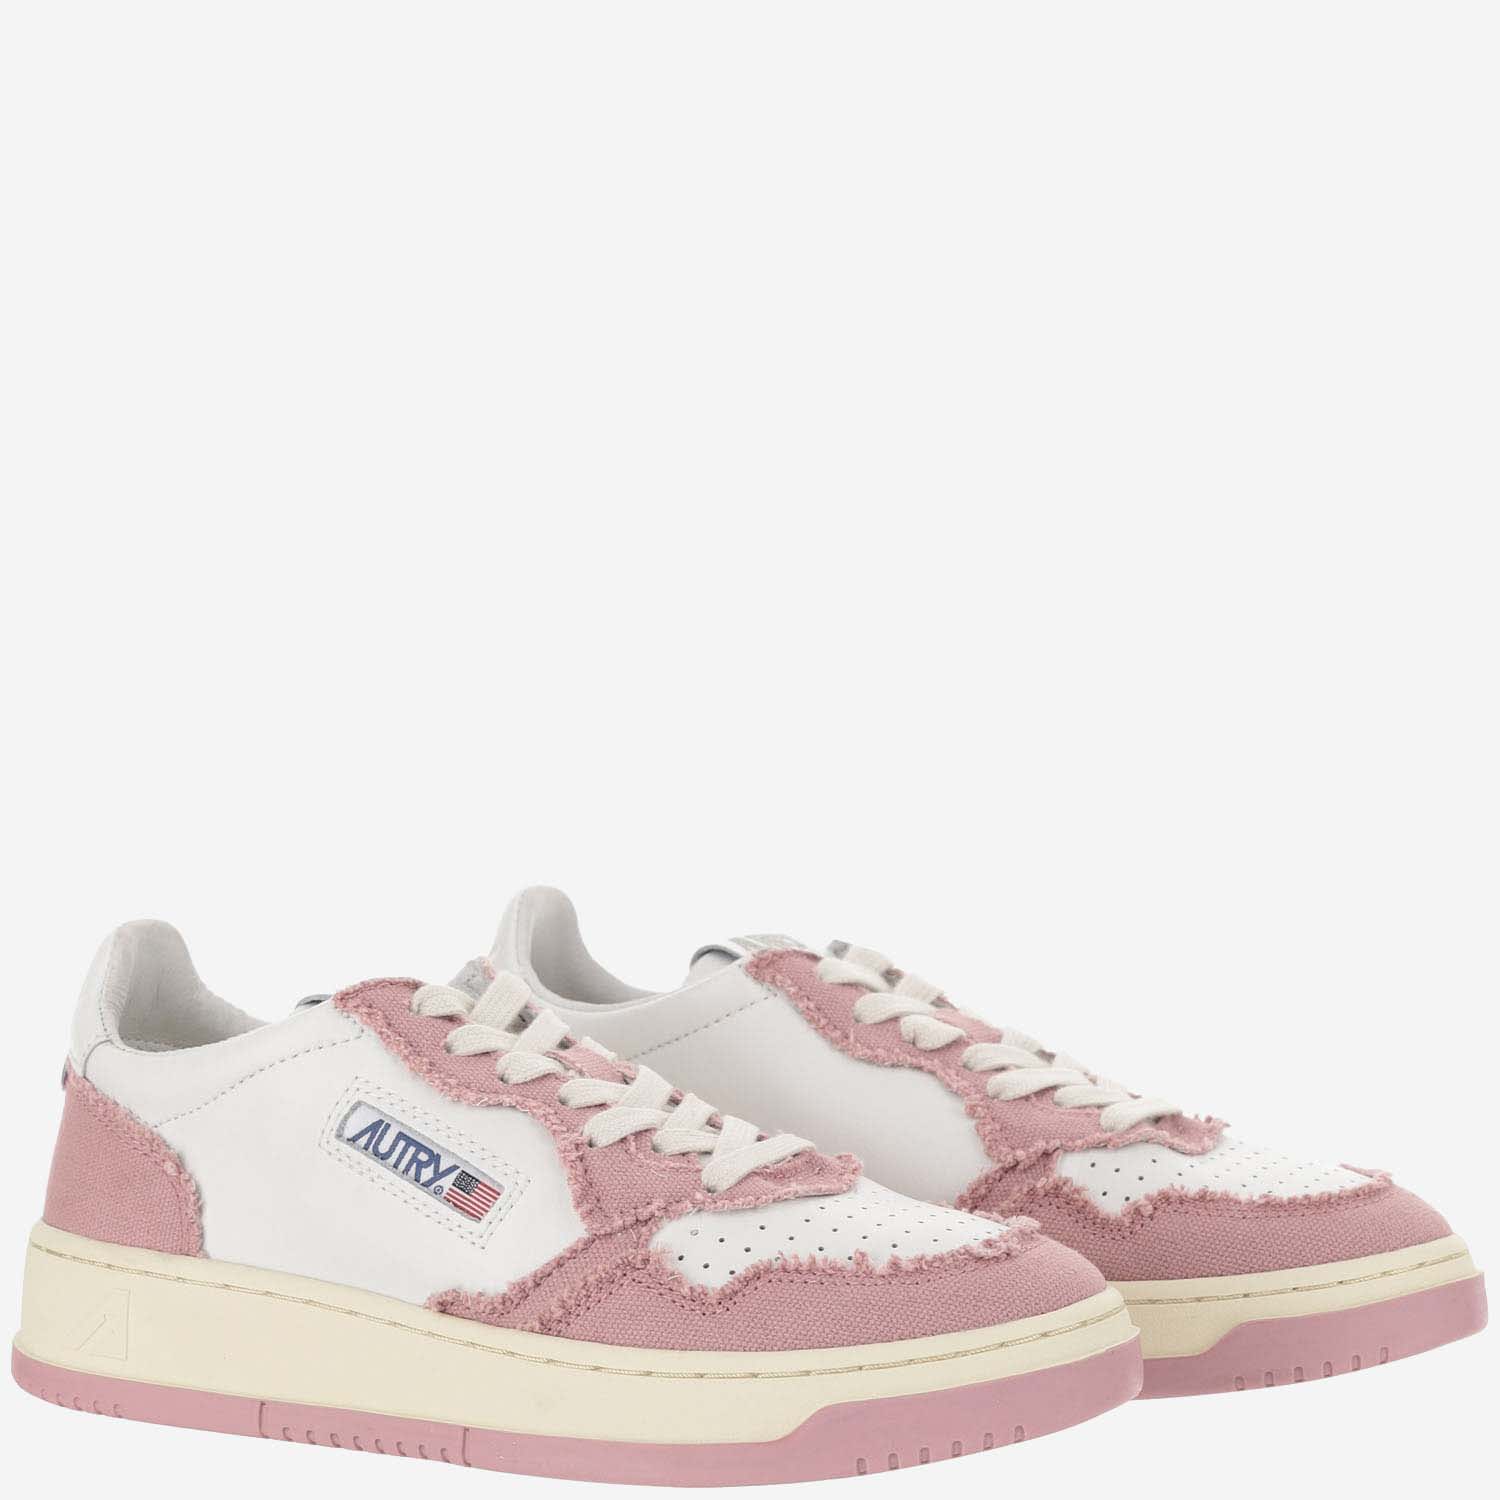 Shop Autry Low Medalist Leather Sneakers In Pink